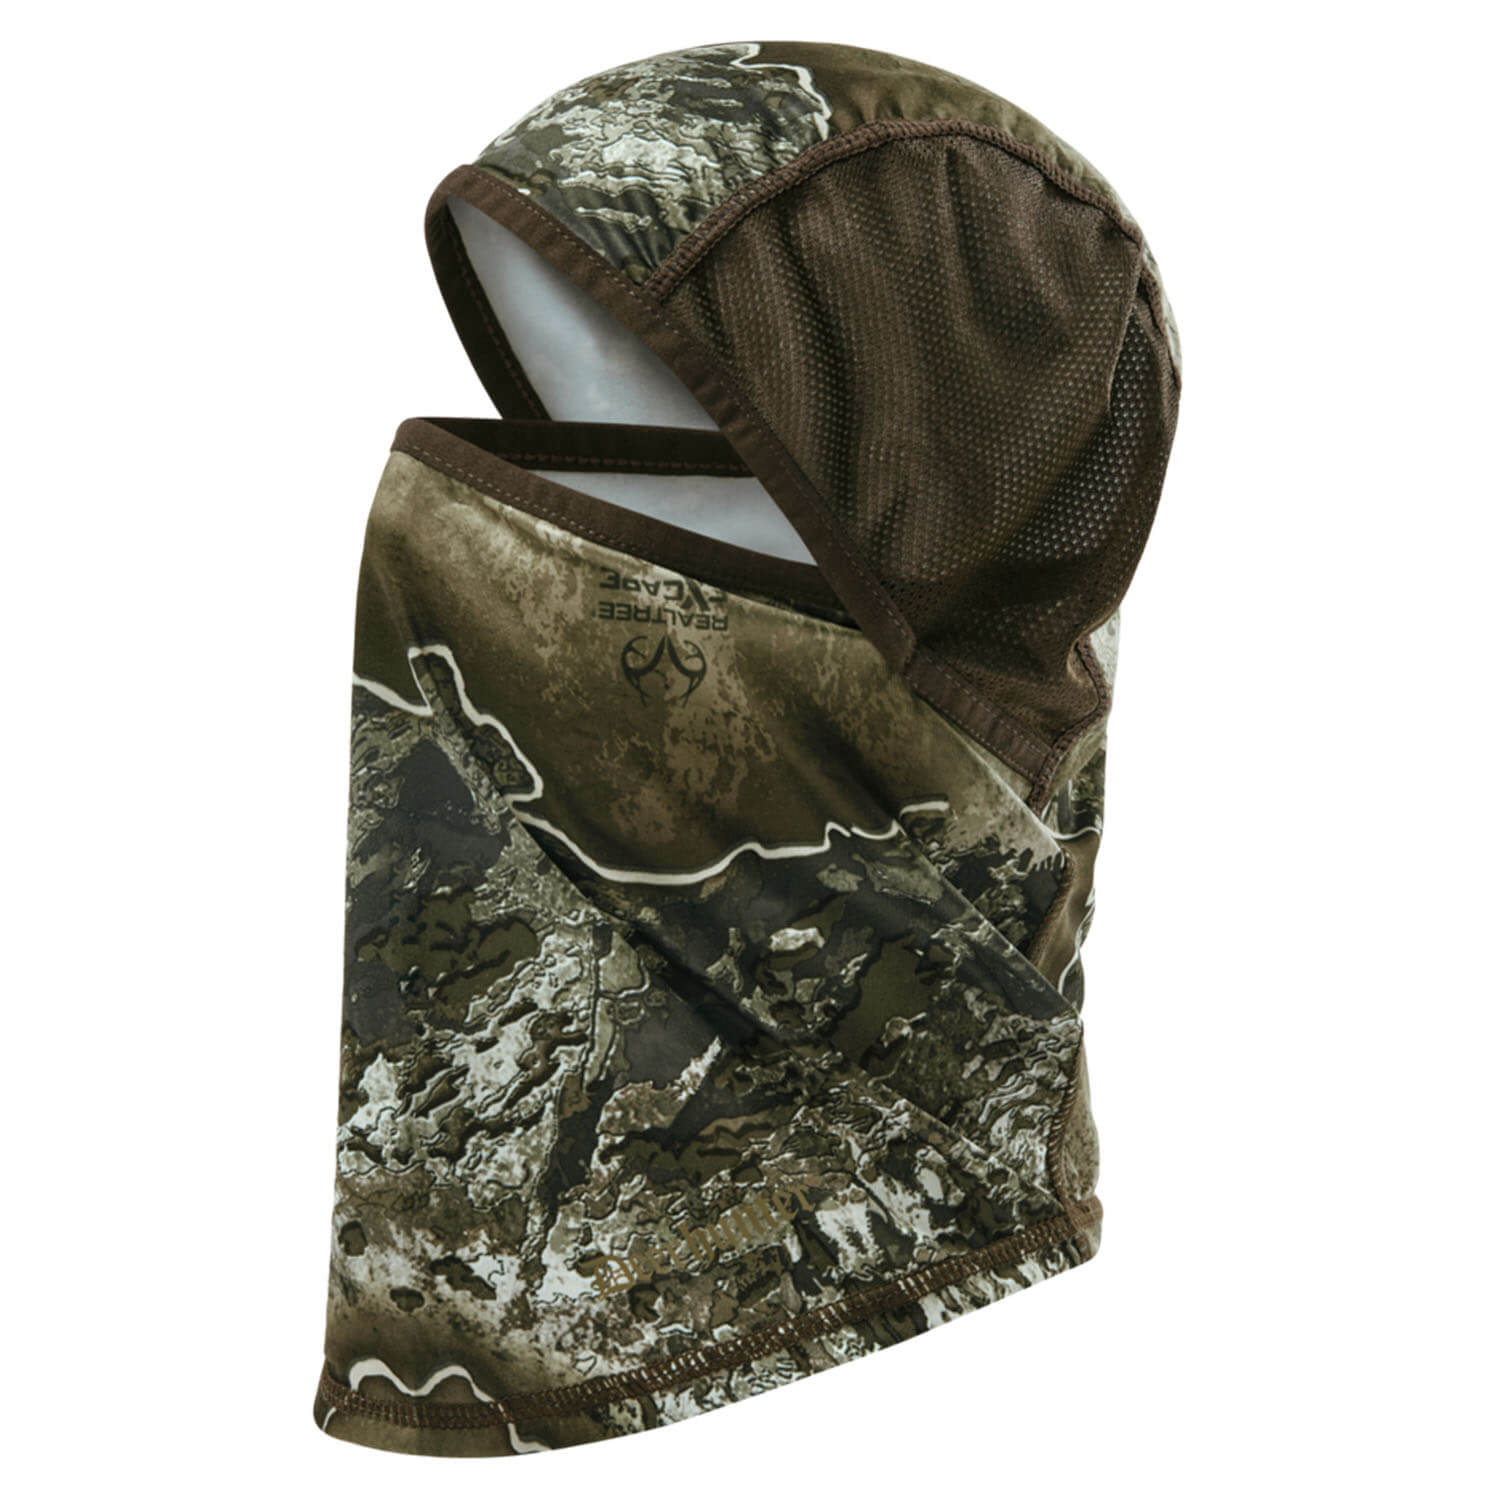 Deerhunter facemask excape (realtree excape) - Scarf & Neck Warmer